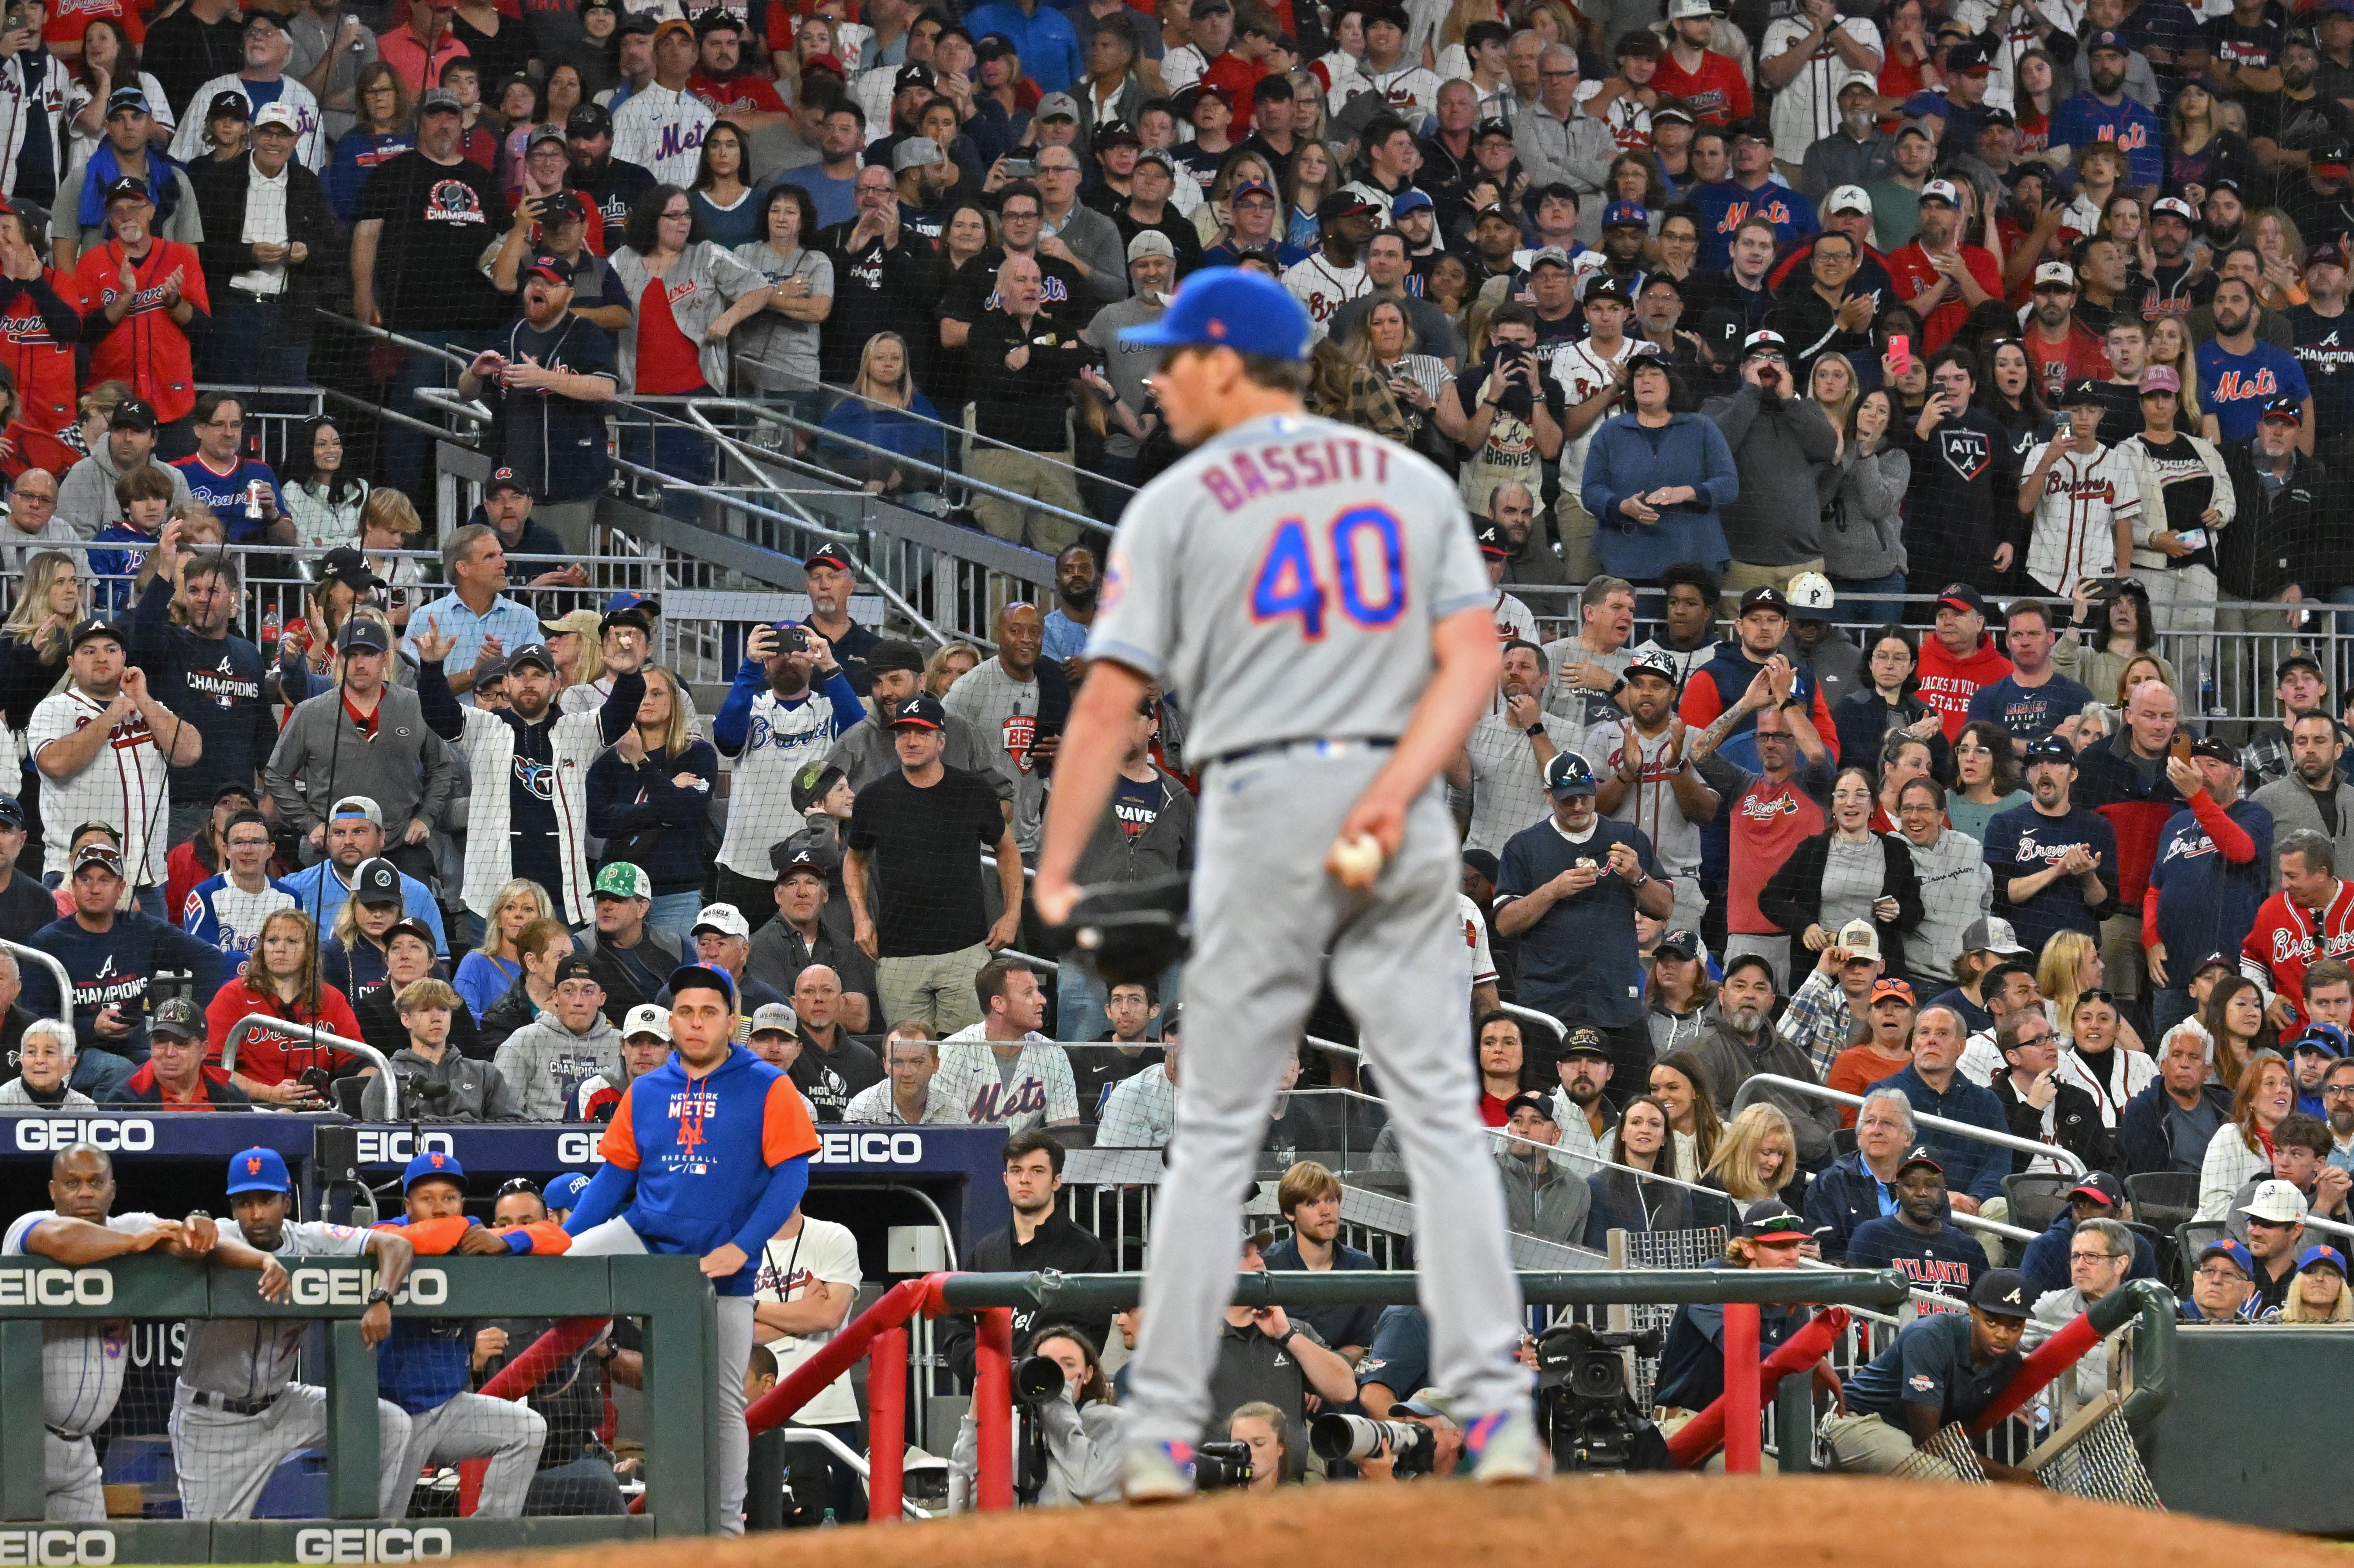 Mets score 6 in the 5th, salvage series finale against Braves - CBS New York